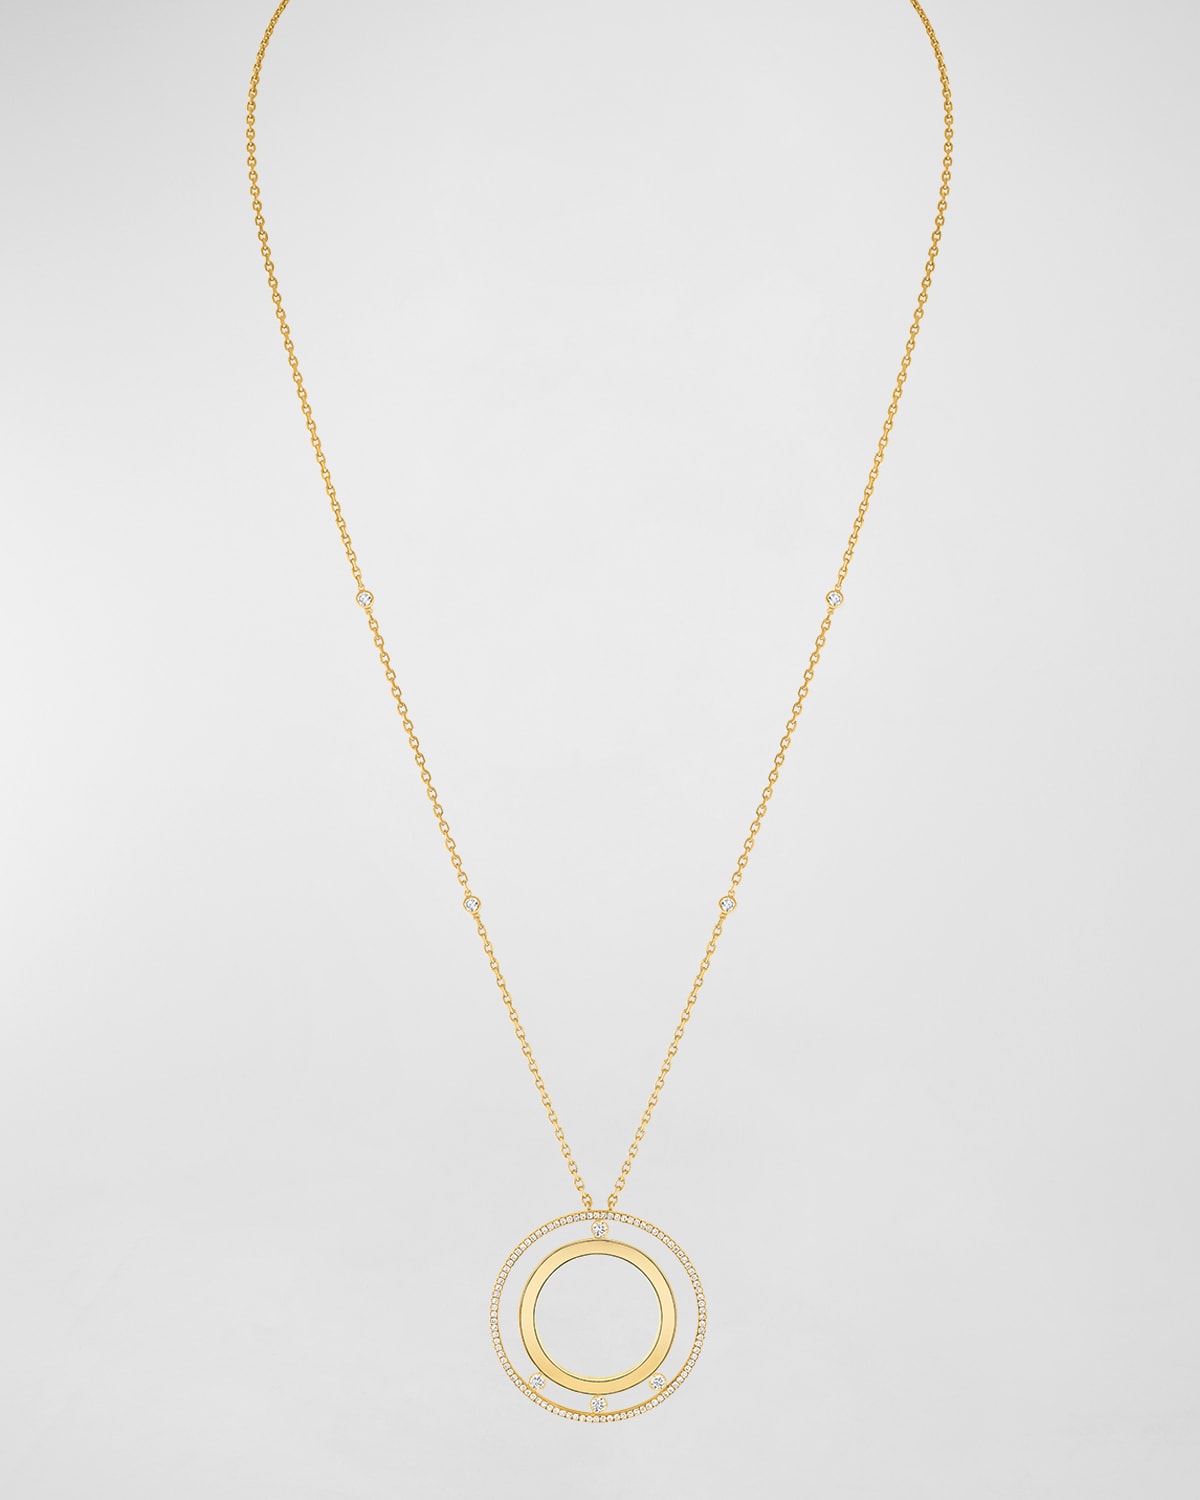 Messika Move Romane 18k Yellow Gold Diamond Necklace In 05 Yellow Gold